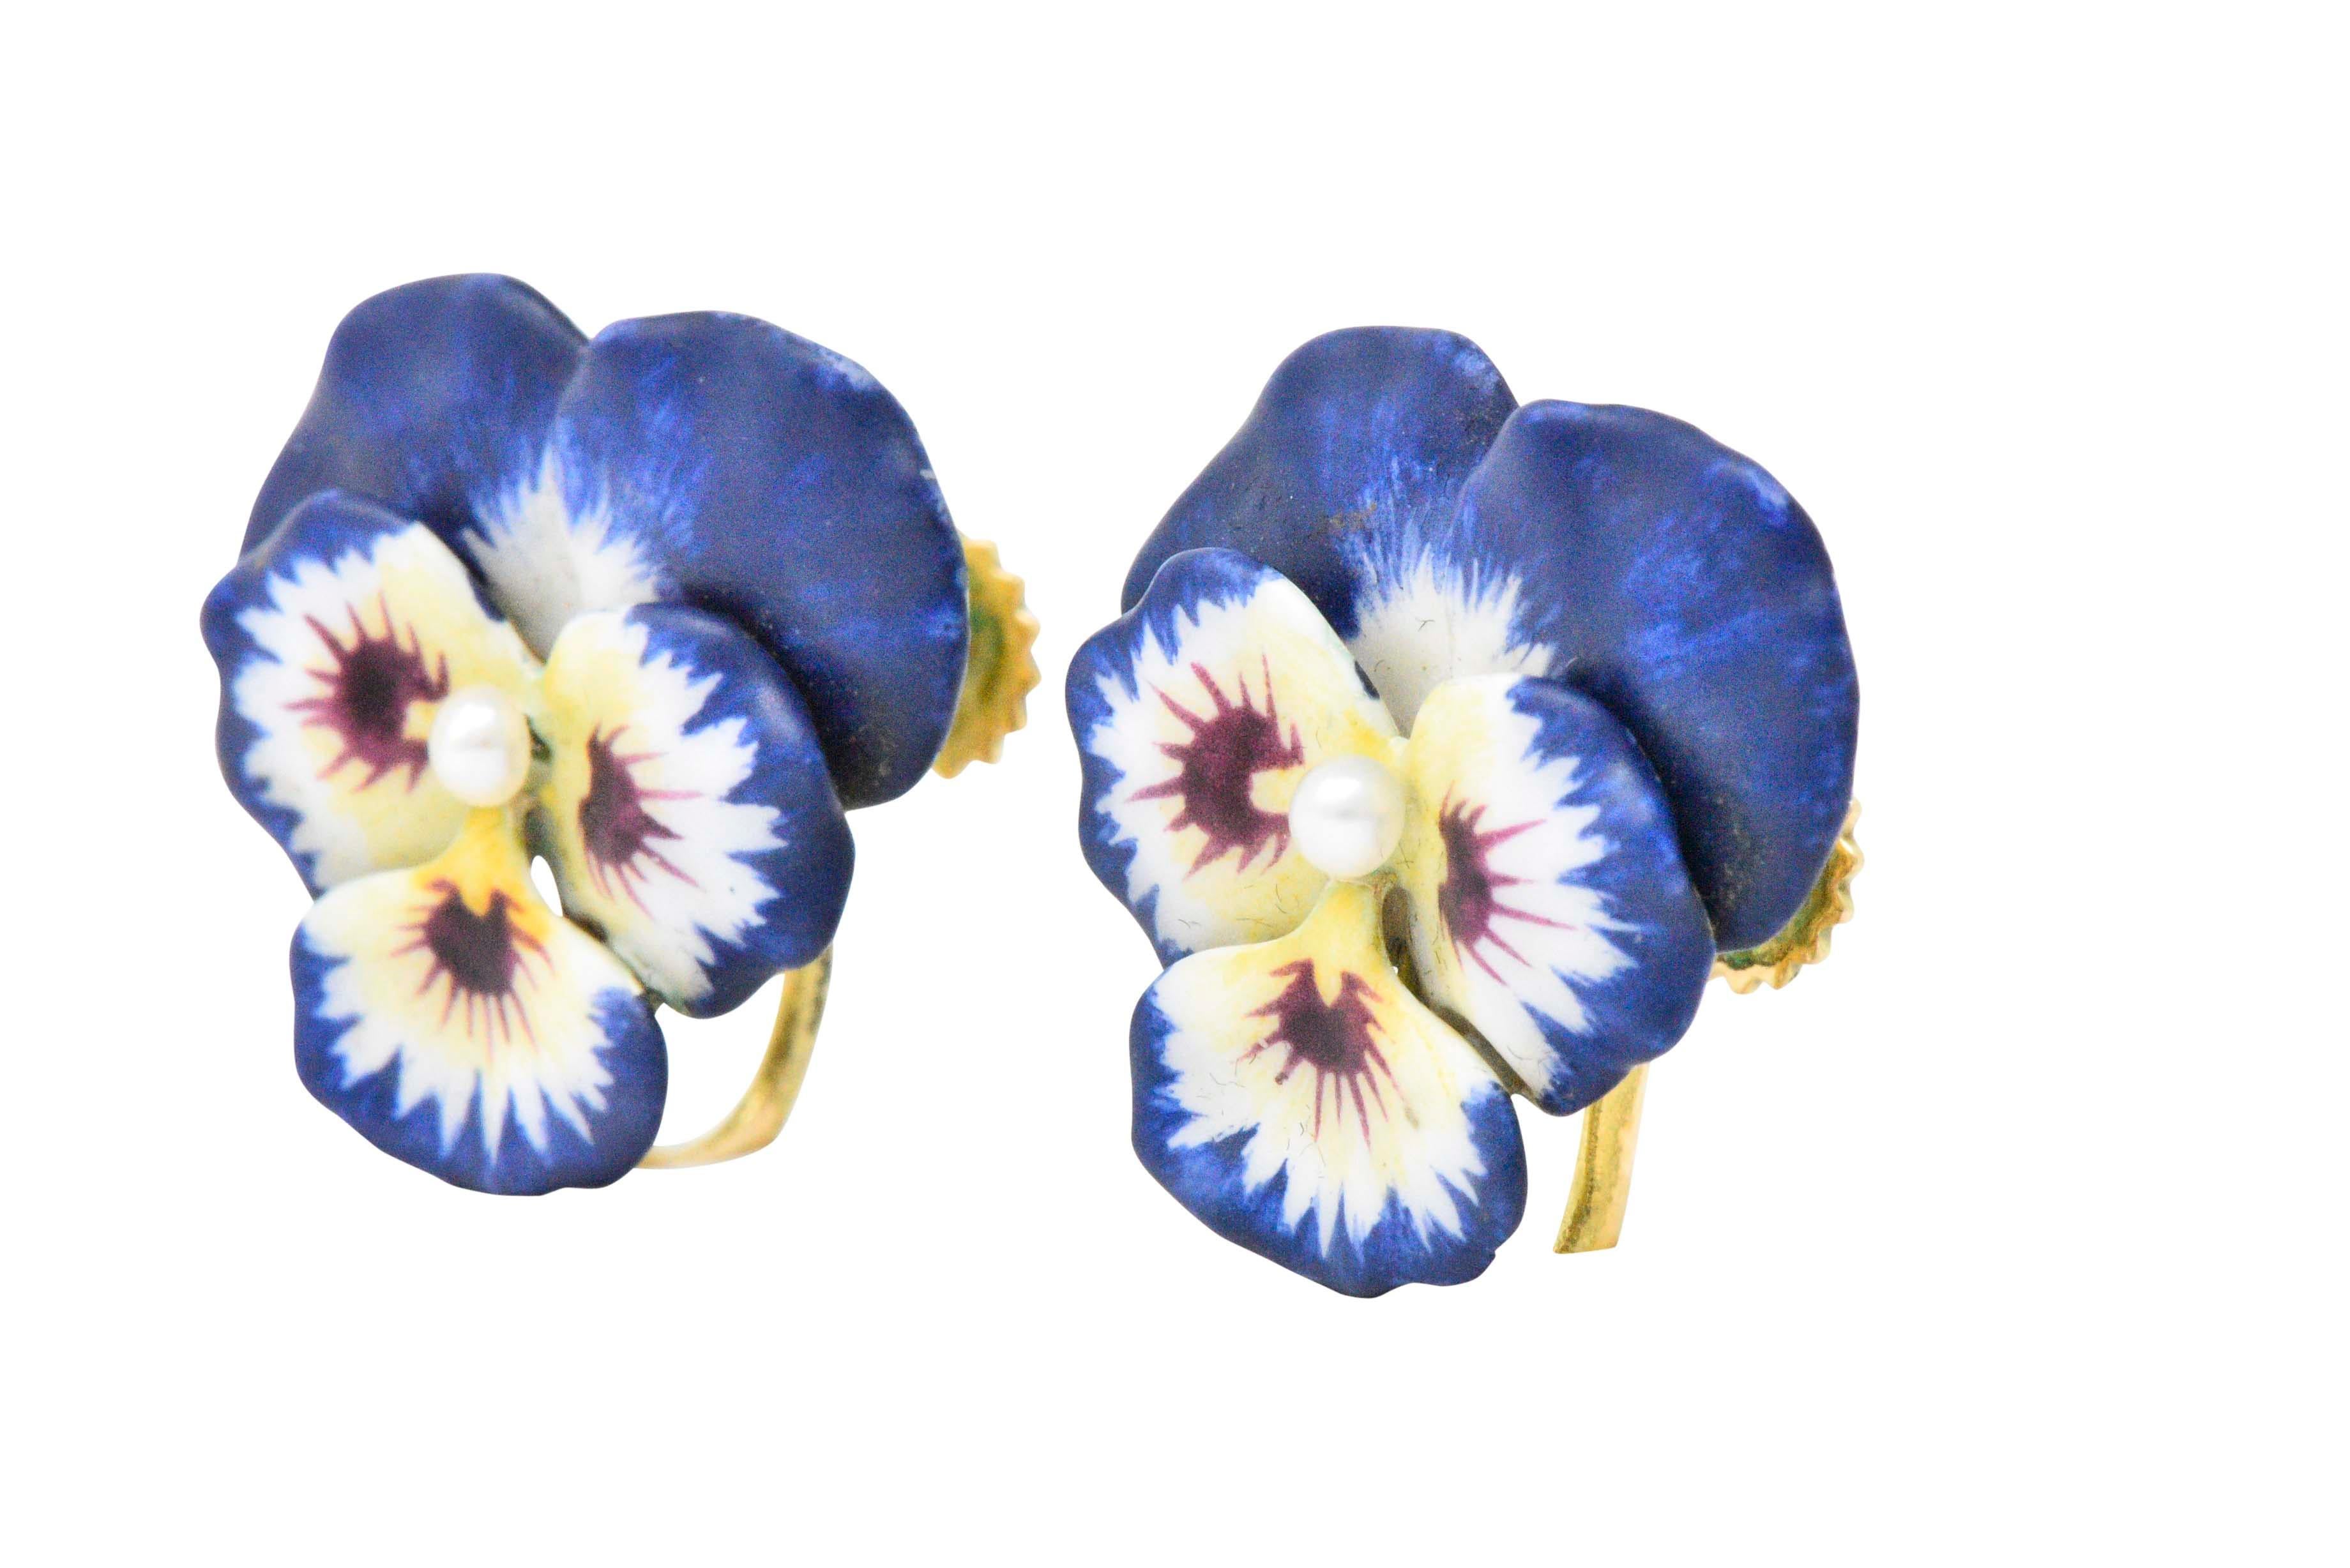 Designed as pansies with indigo, white, yellow and wine colored enamel and centering a seed pearl

The has a matte finish and is in very good condition with no signs of loss

Sweet beautiful and colorful earrings

With screw backs

Maker's mark for